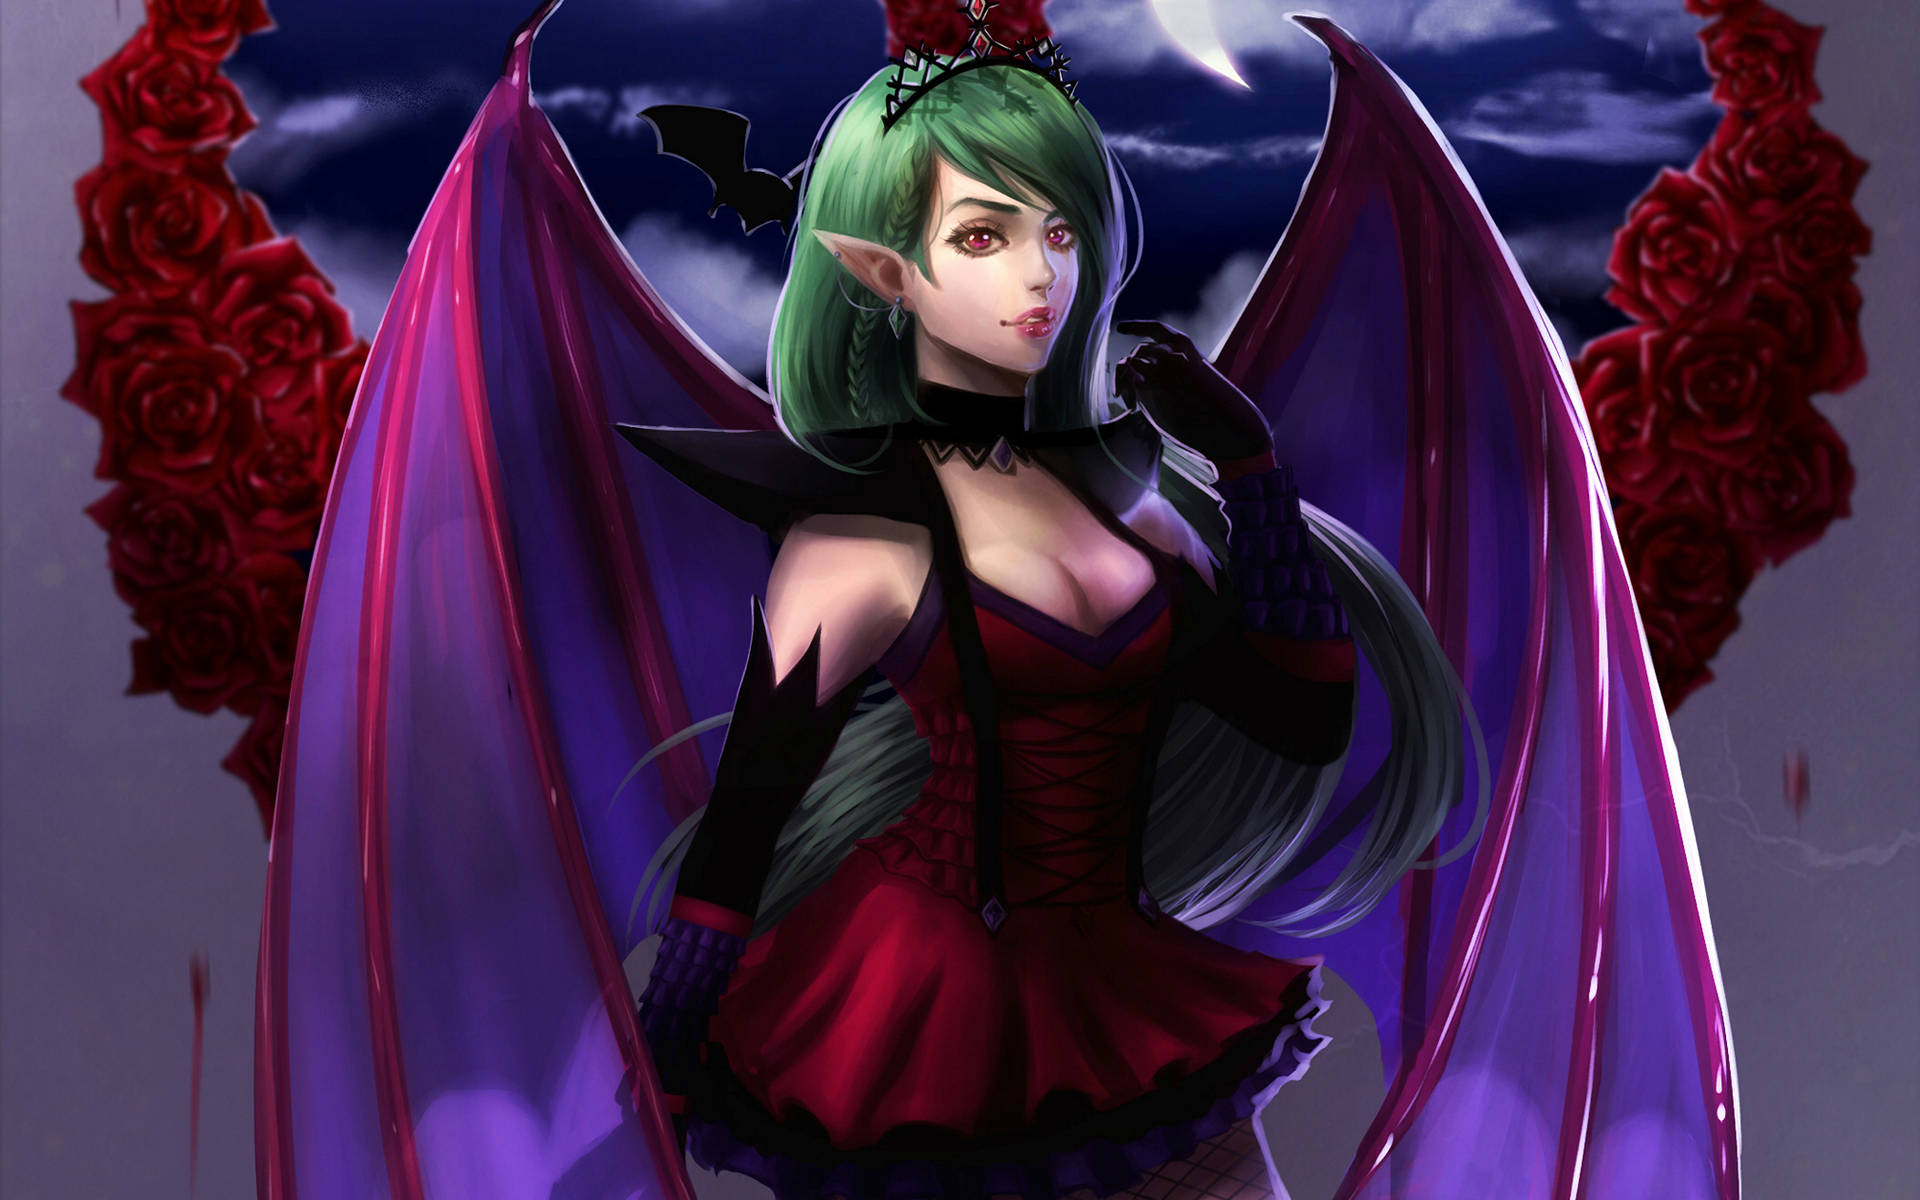 Green Haired Succubus With Roses